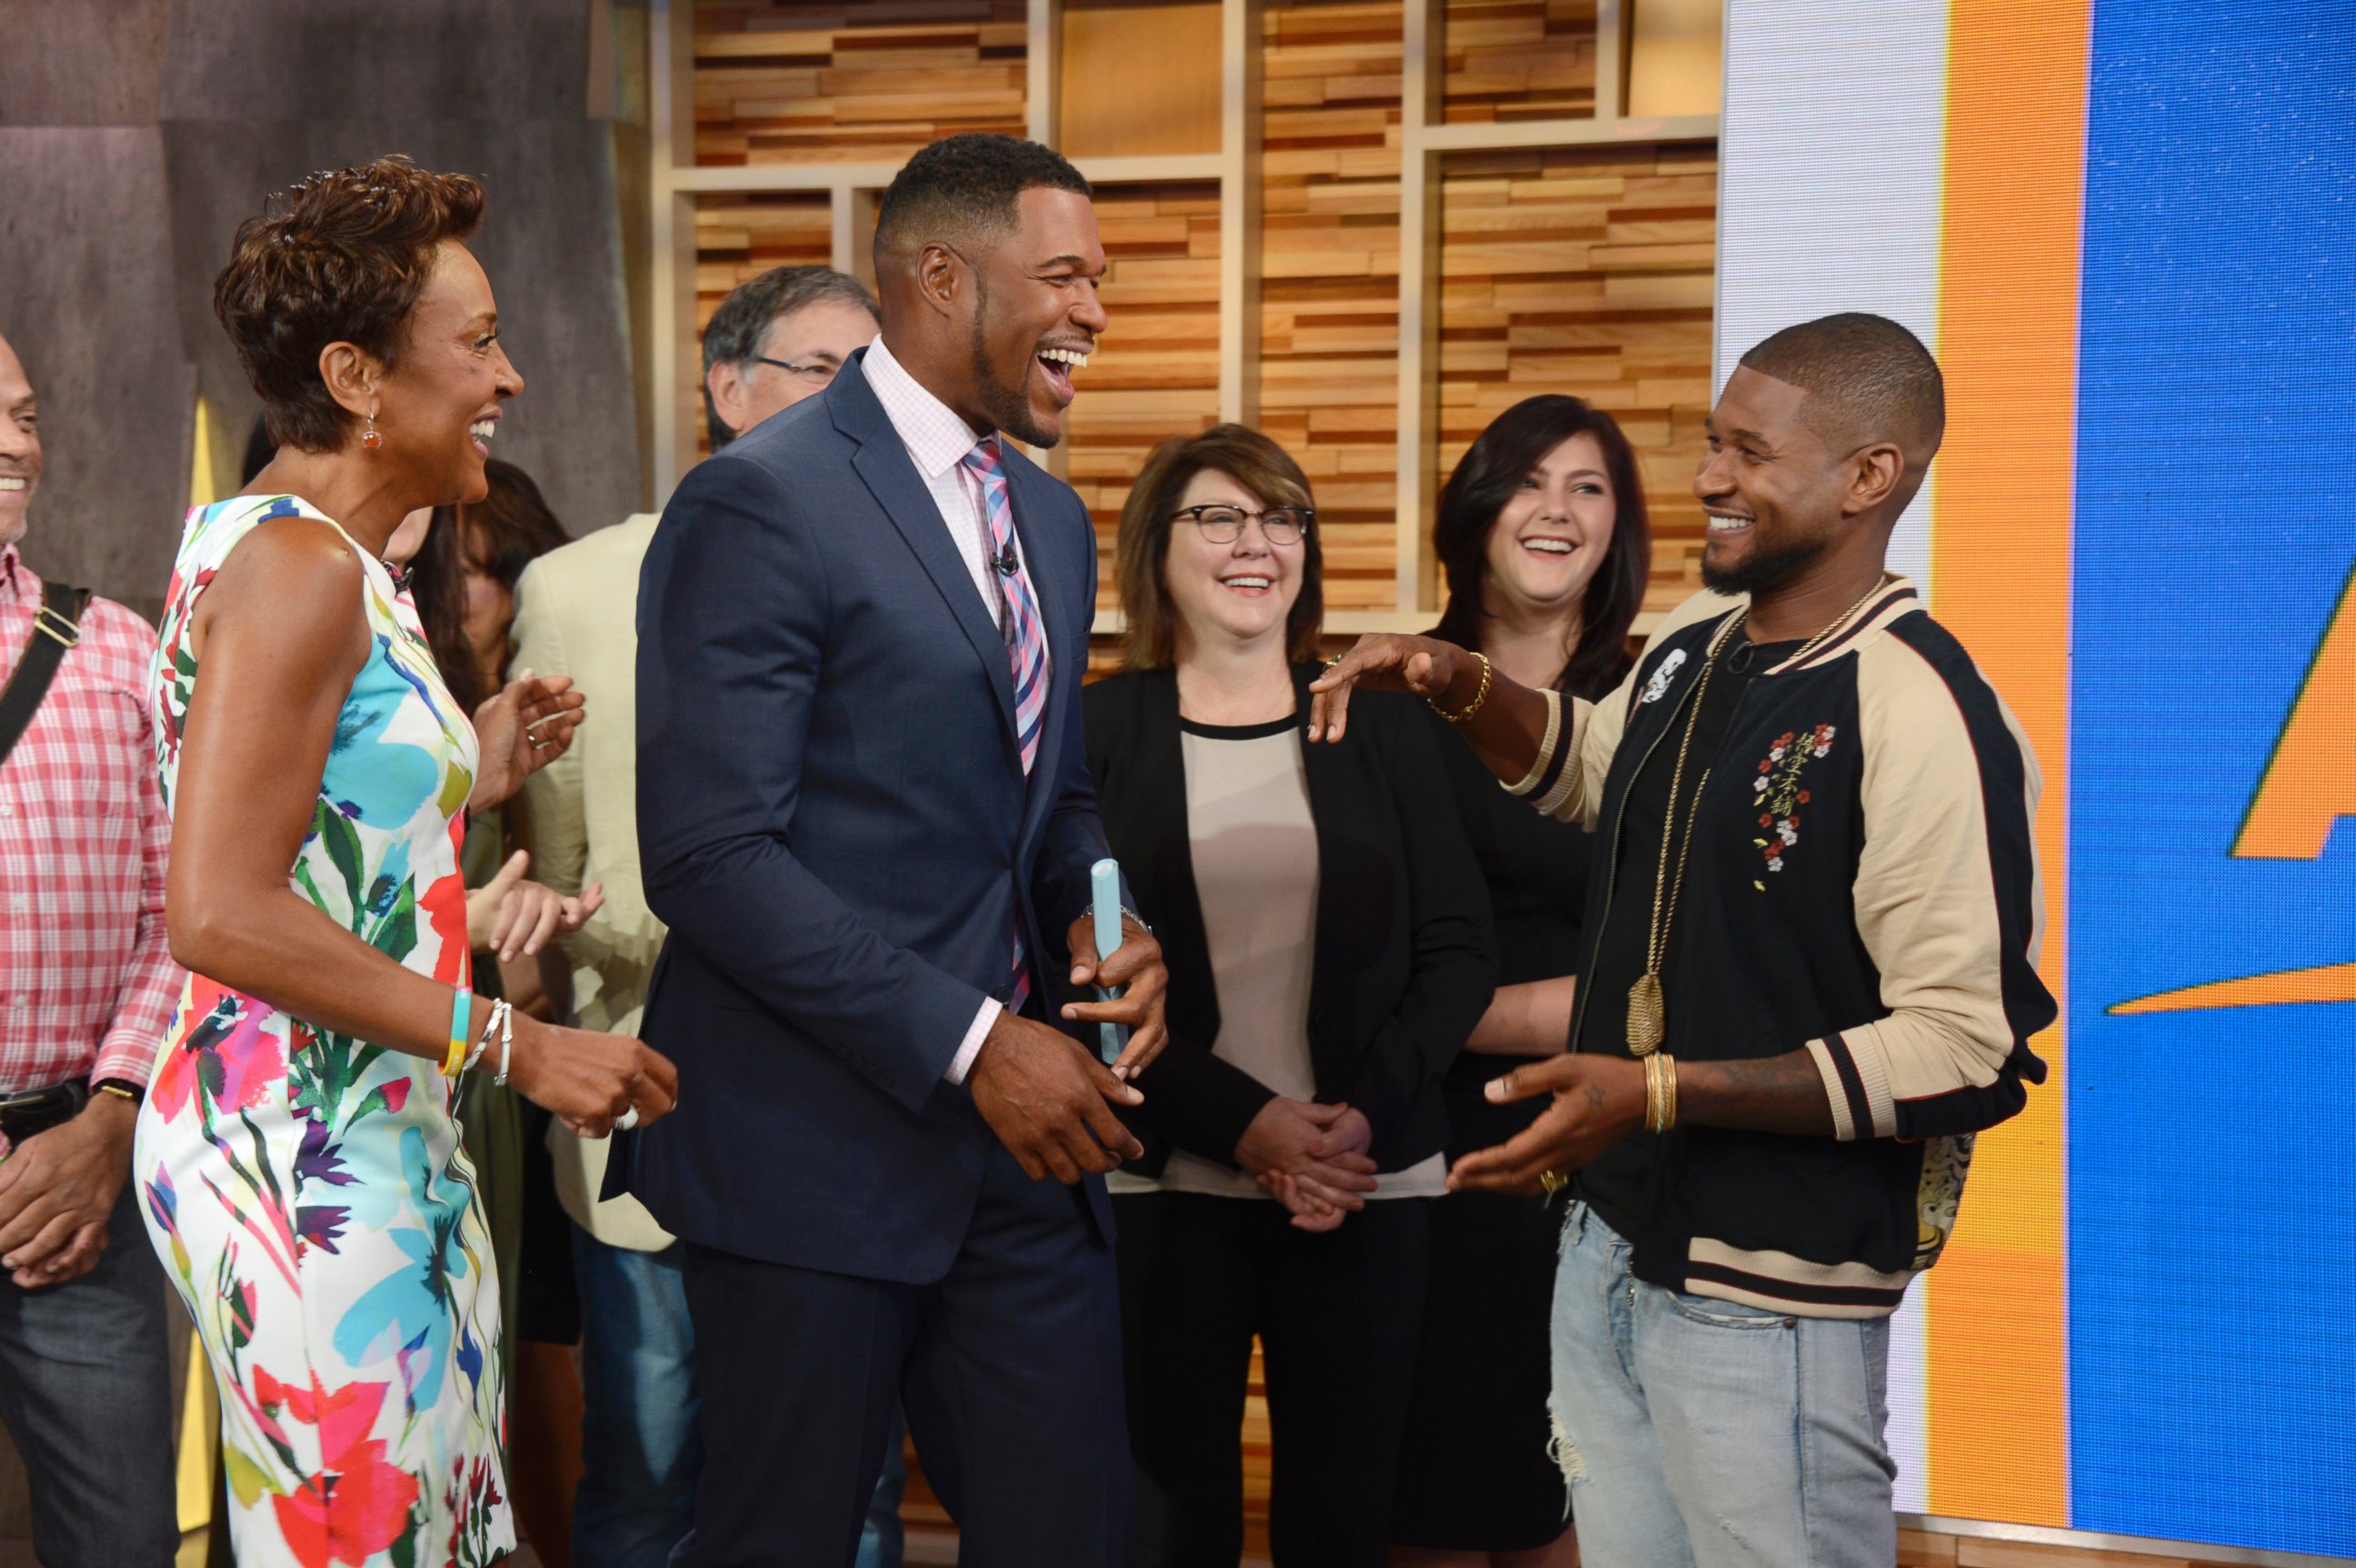 PHOTO:Michael Strahan brings "best friend" Usher to his first full-time day at "GMA."